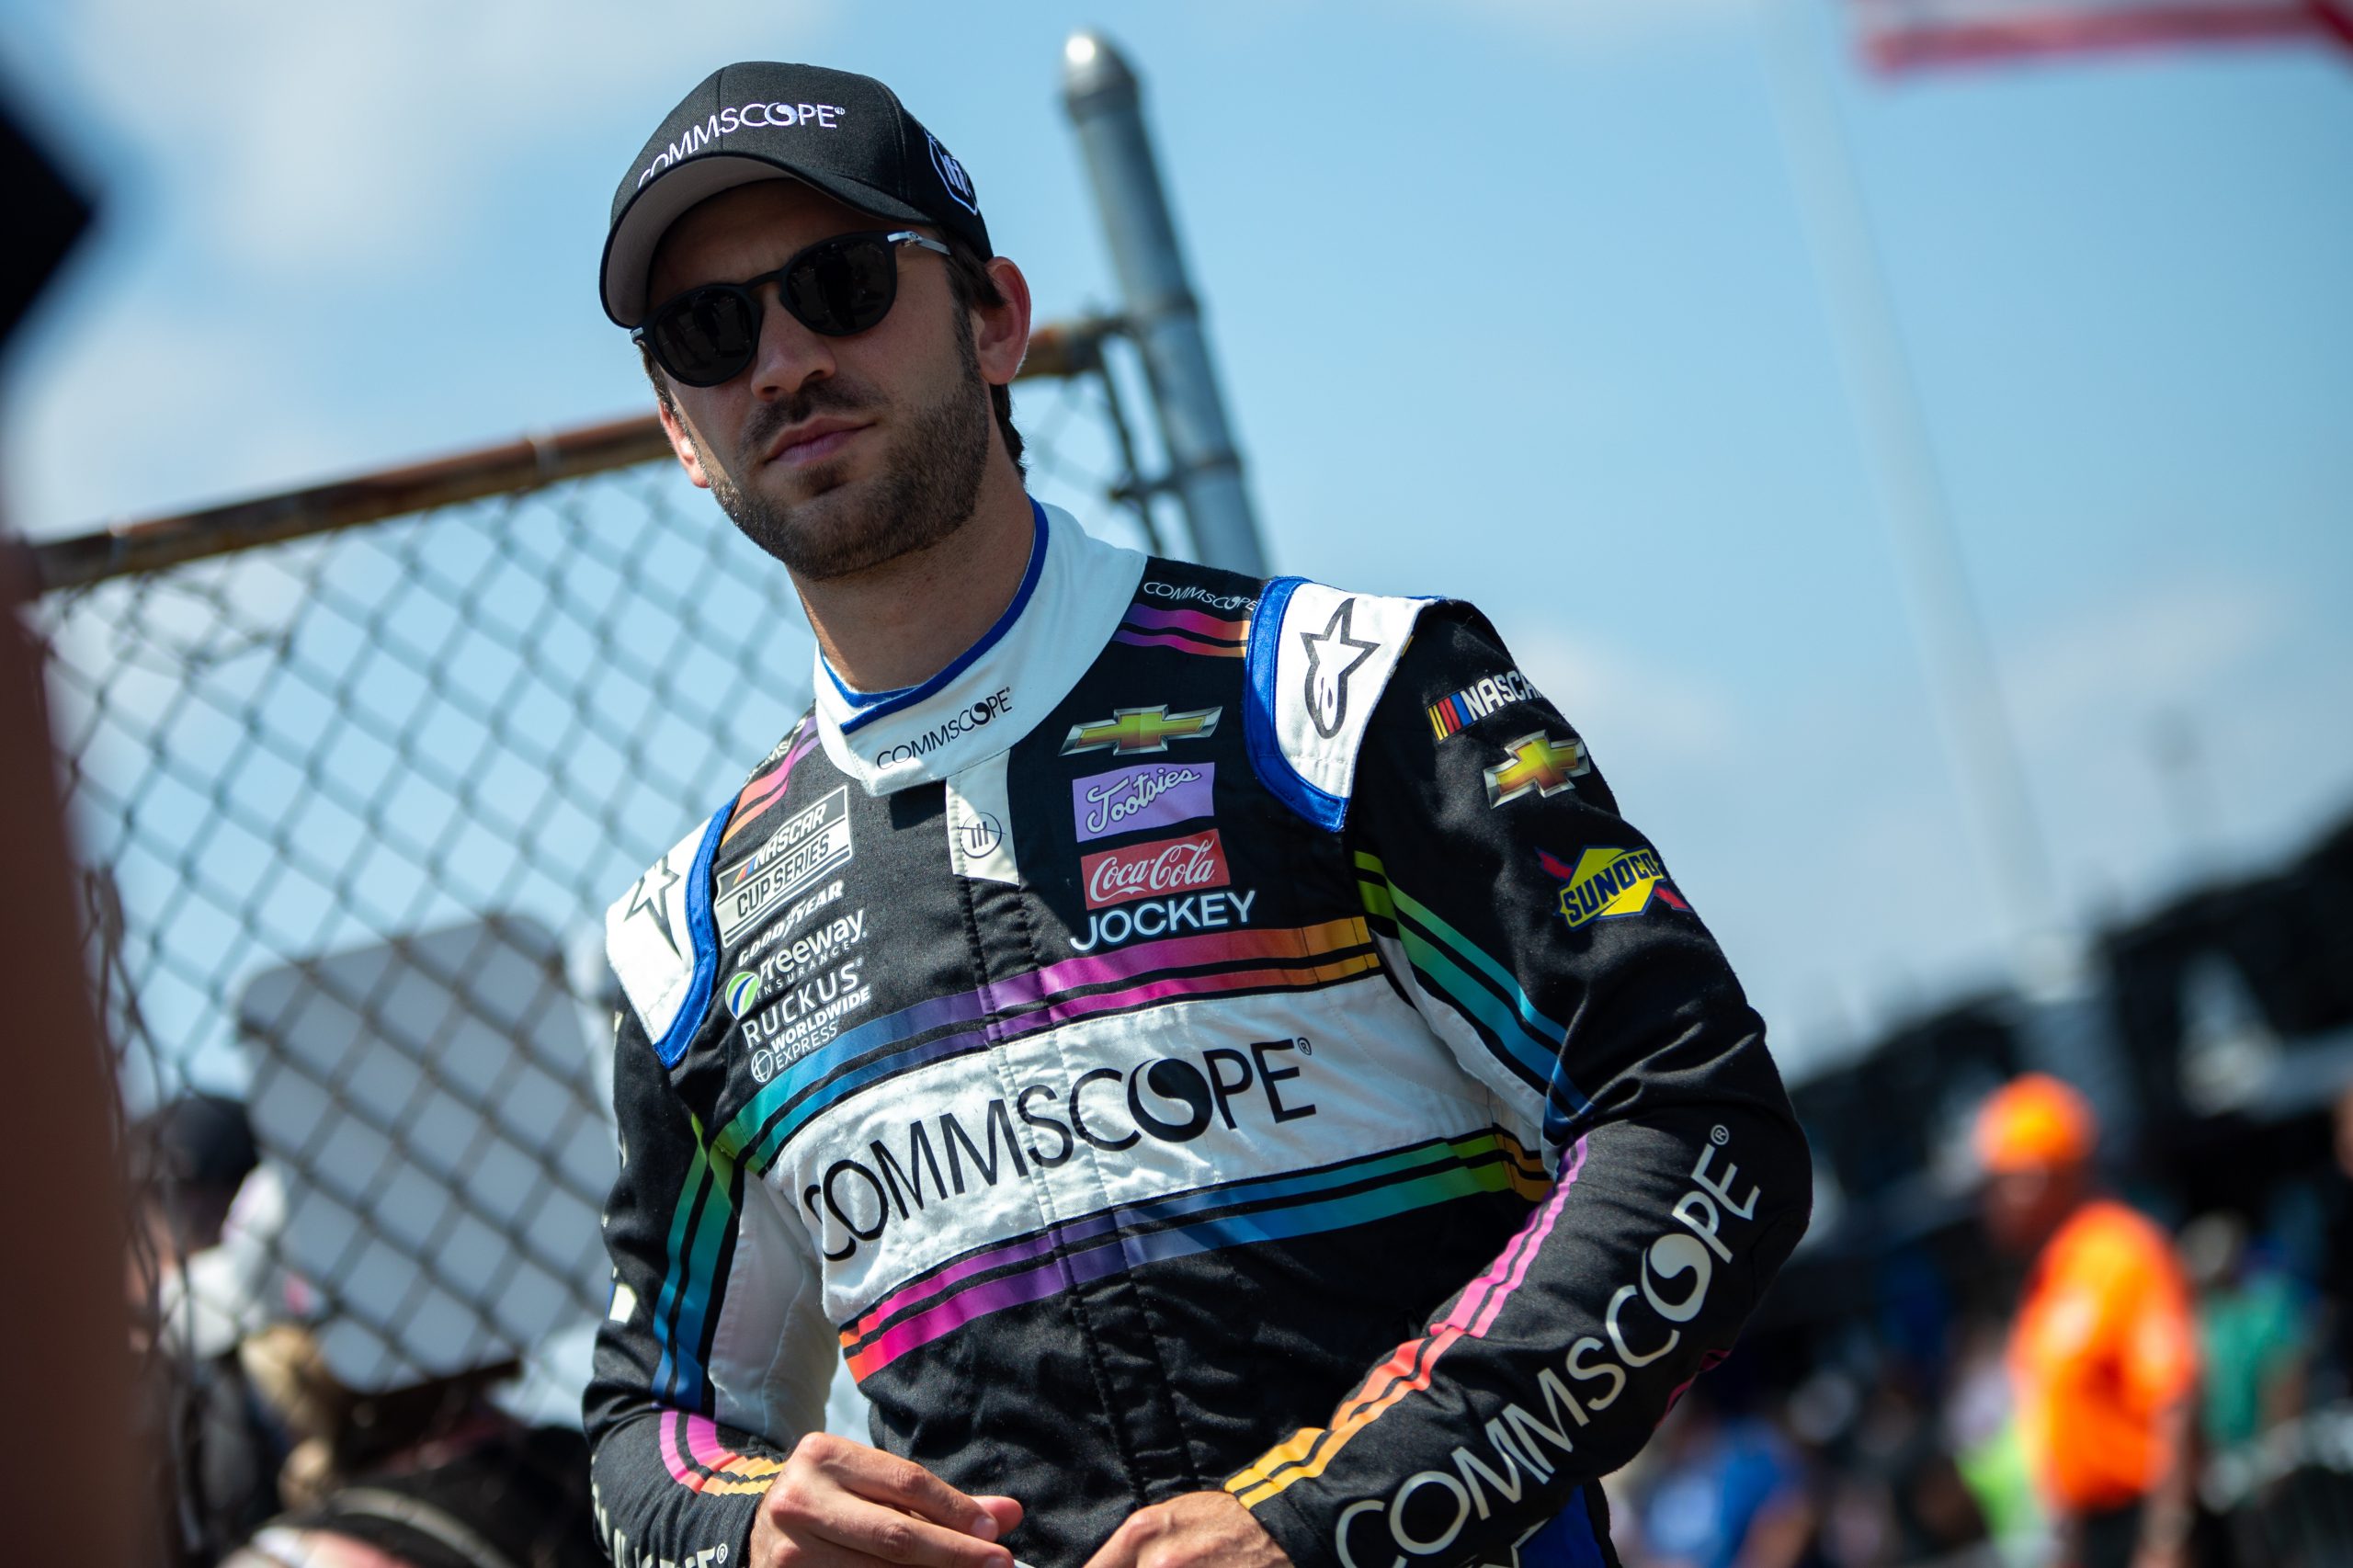 Daniel Suárez chimes in with his Watkins Glen thoughts. (Photo: Sam Draiss | The Podium Finish)